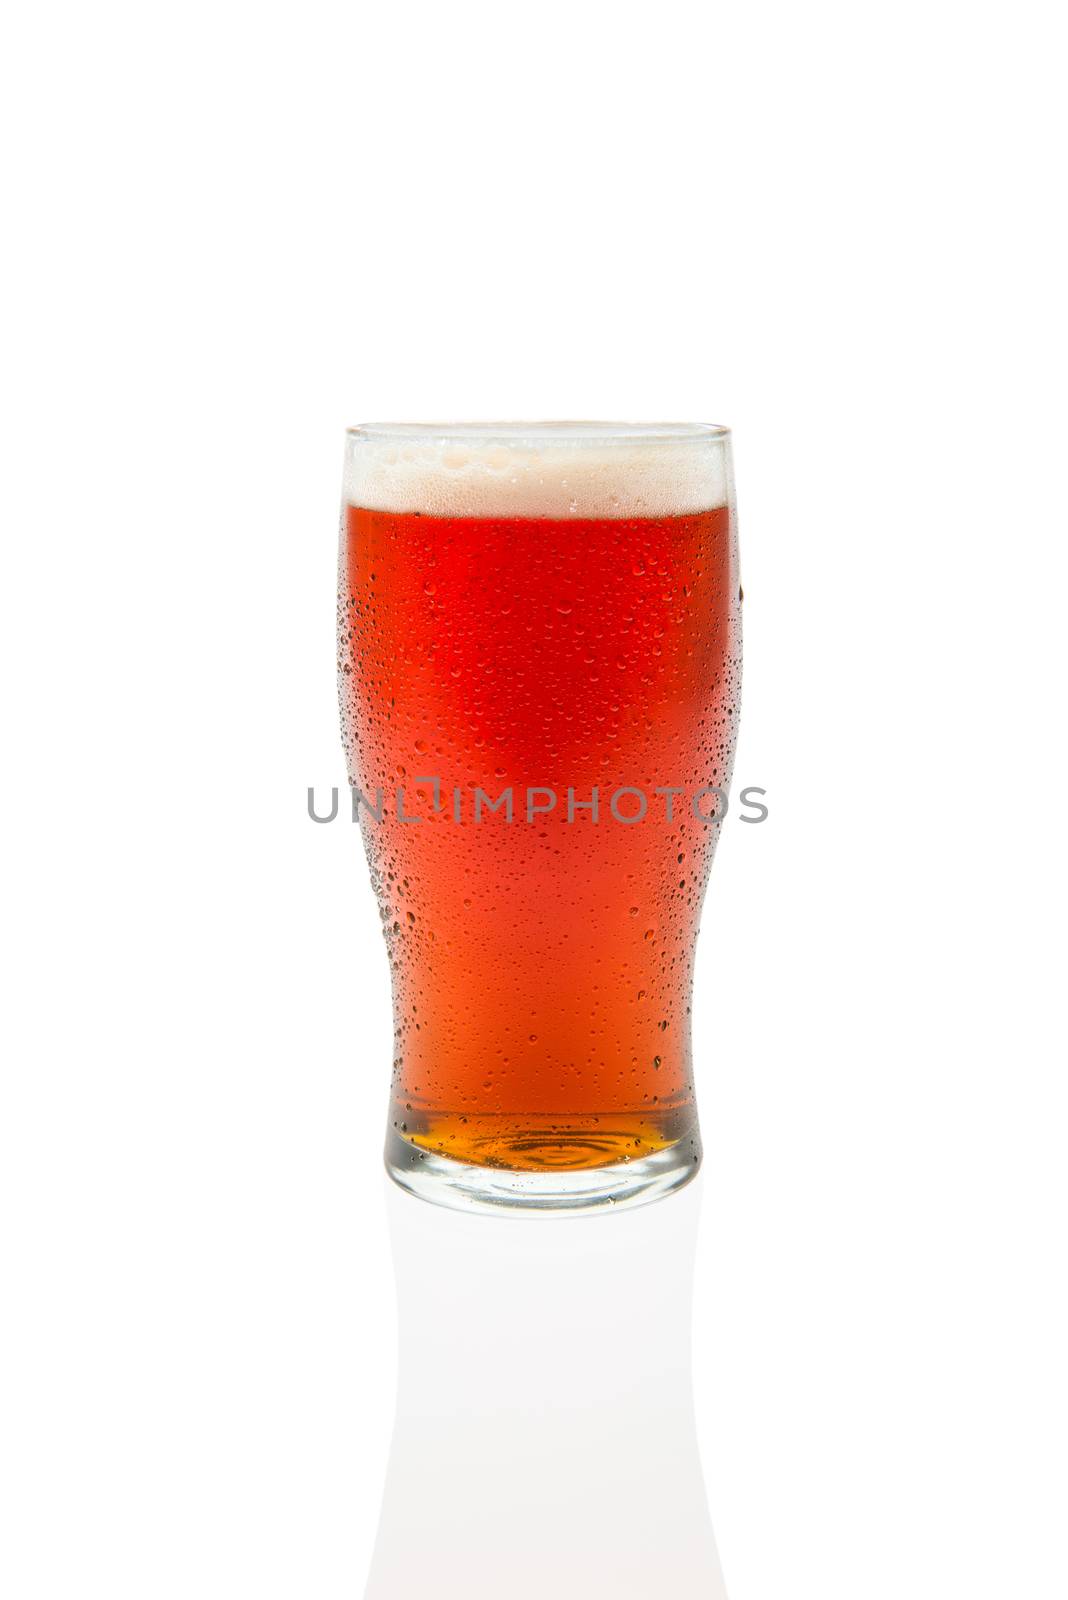 Amber Ale In Pint Glass #2 by patrickstock